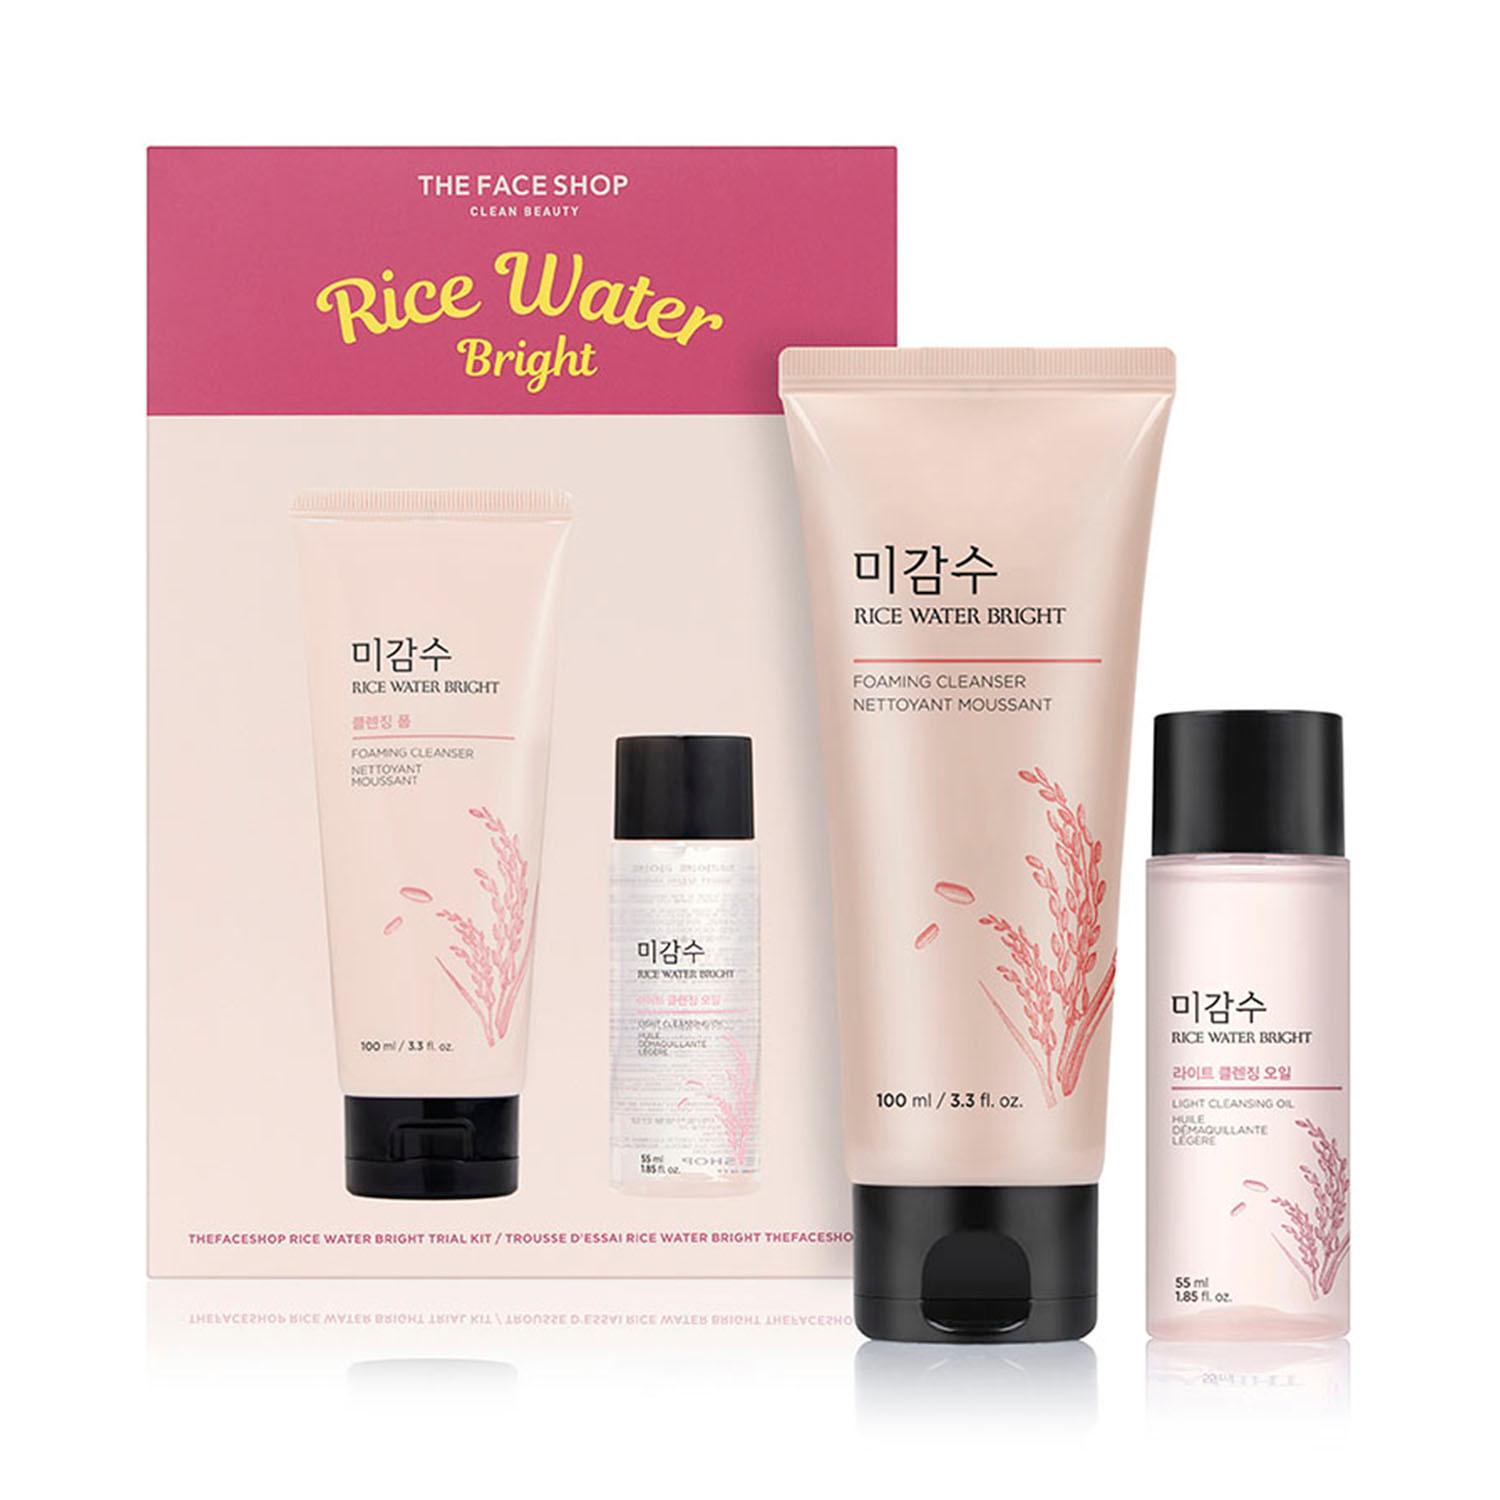 The Face Shop | The Face Shop Rice Water Bright Double Cleansing Kit with Face Wash & Cleansing Oil - (2 Pcs)